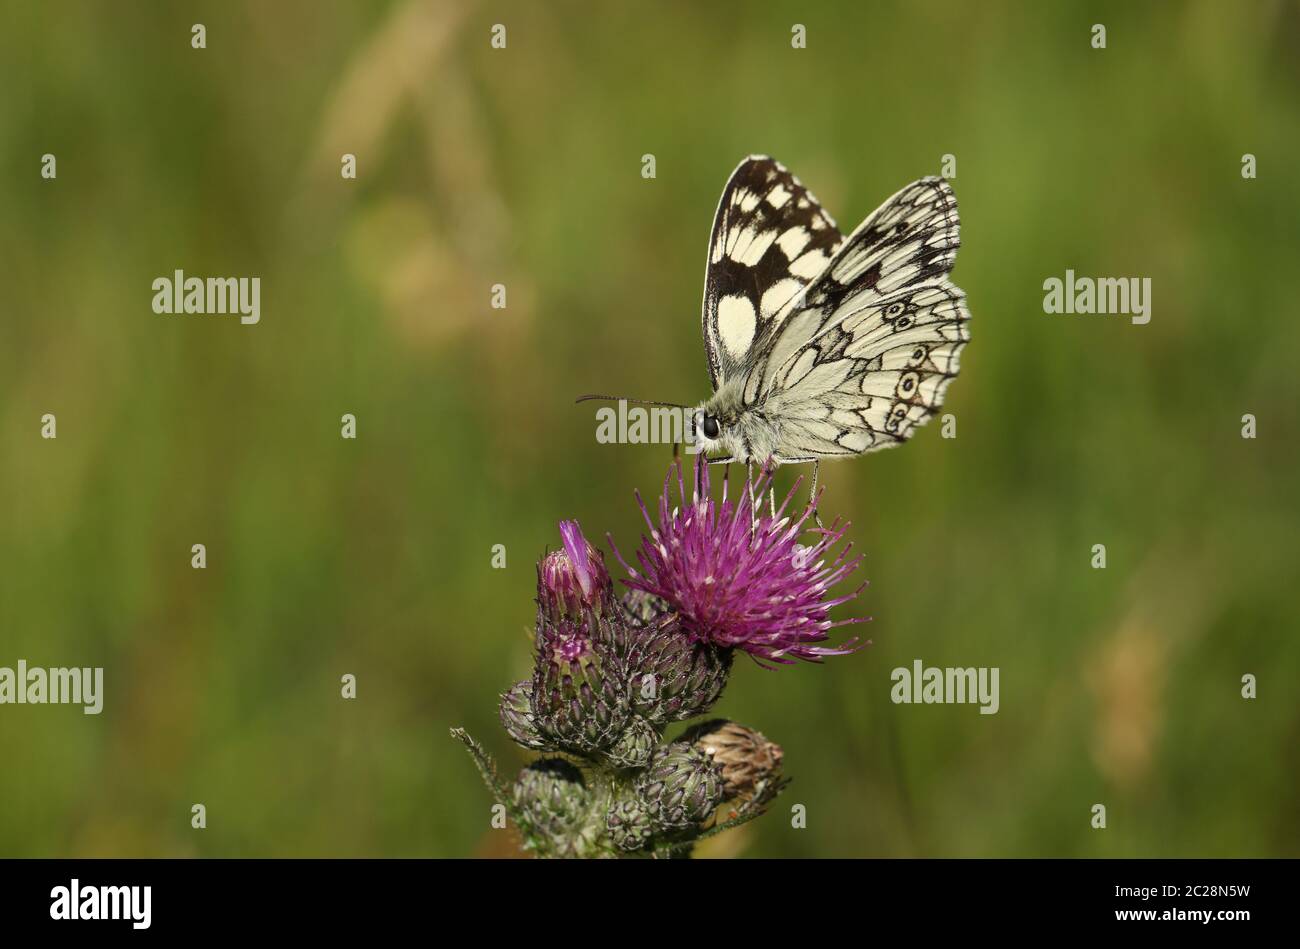 A pretty Marbled White Butterfly, Melanargia galathea, nectaring on a Thistle flower in a meadow. Stock Photo